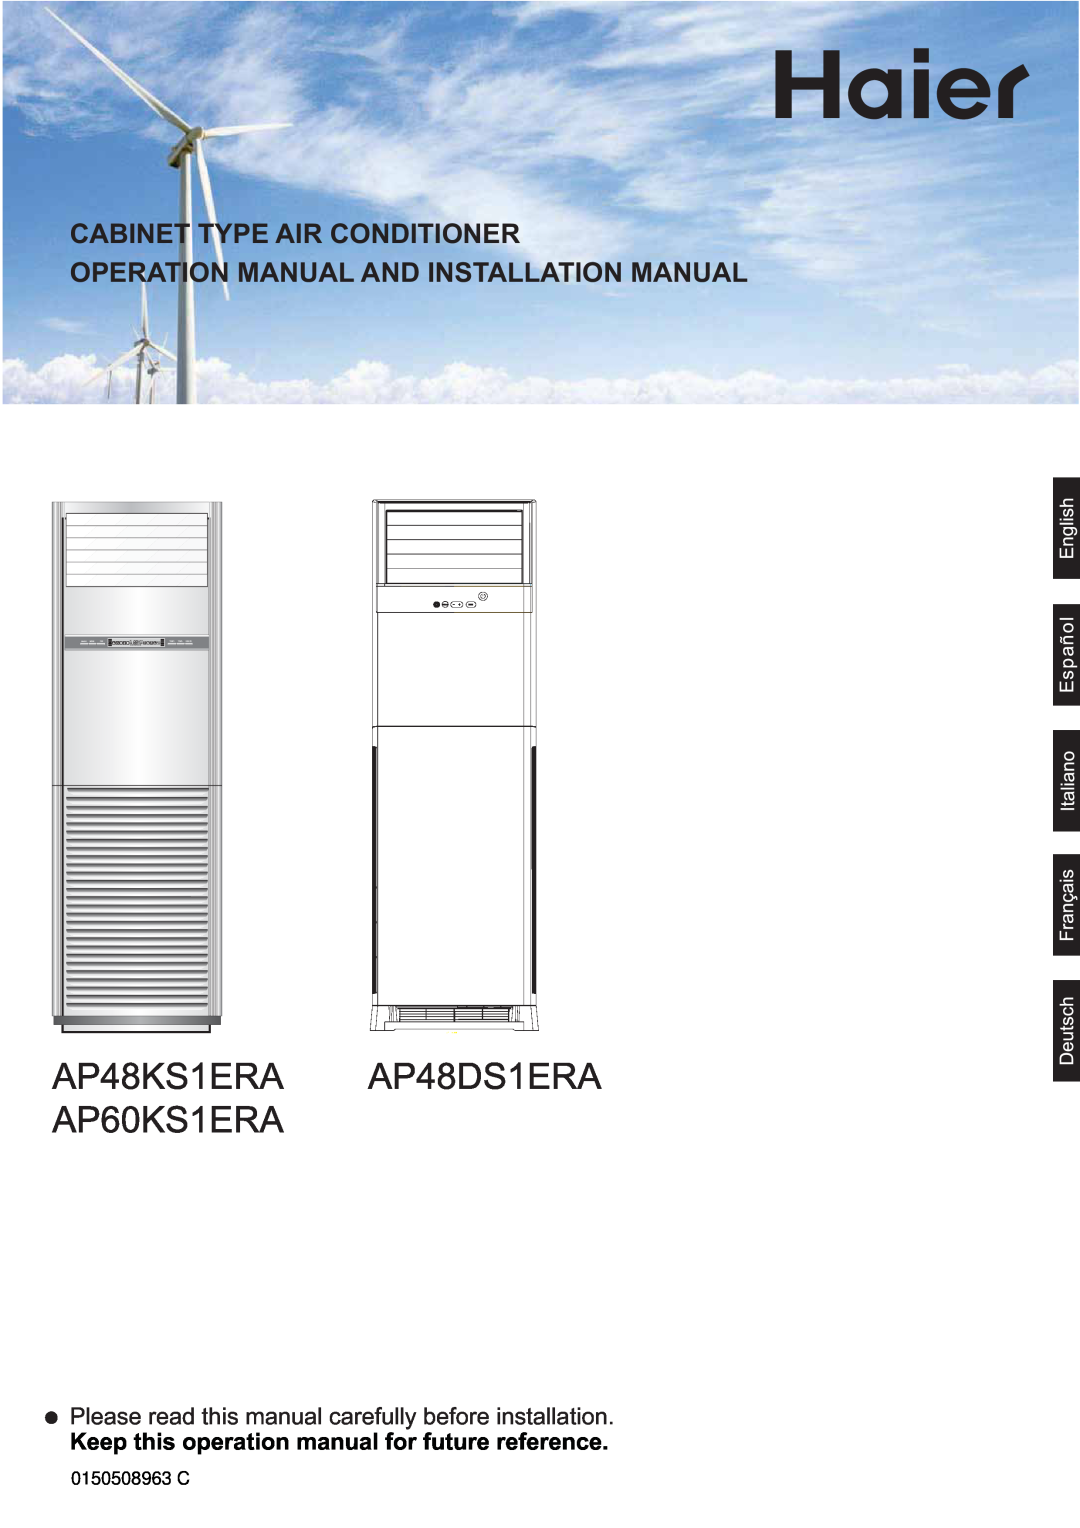 Haier AP48DS1ERA operation manual Cabinet Type Air Conditioner, Keep this operation manual for future reference 